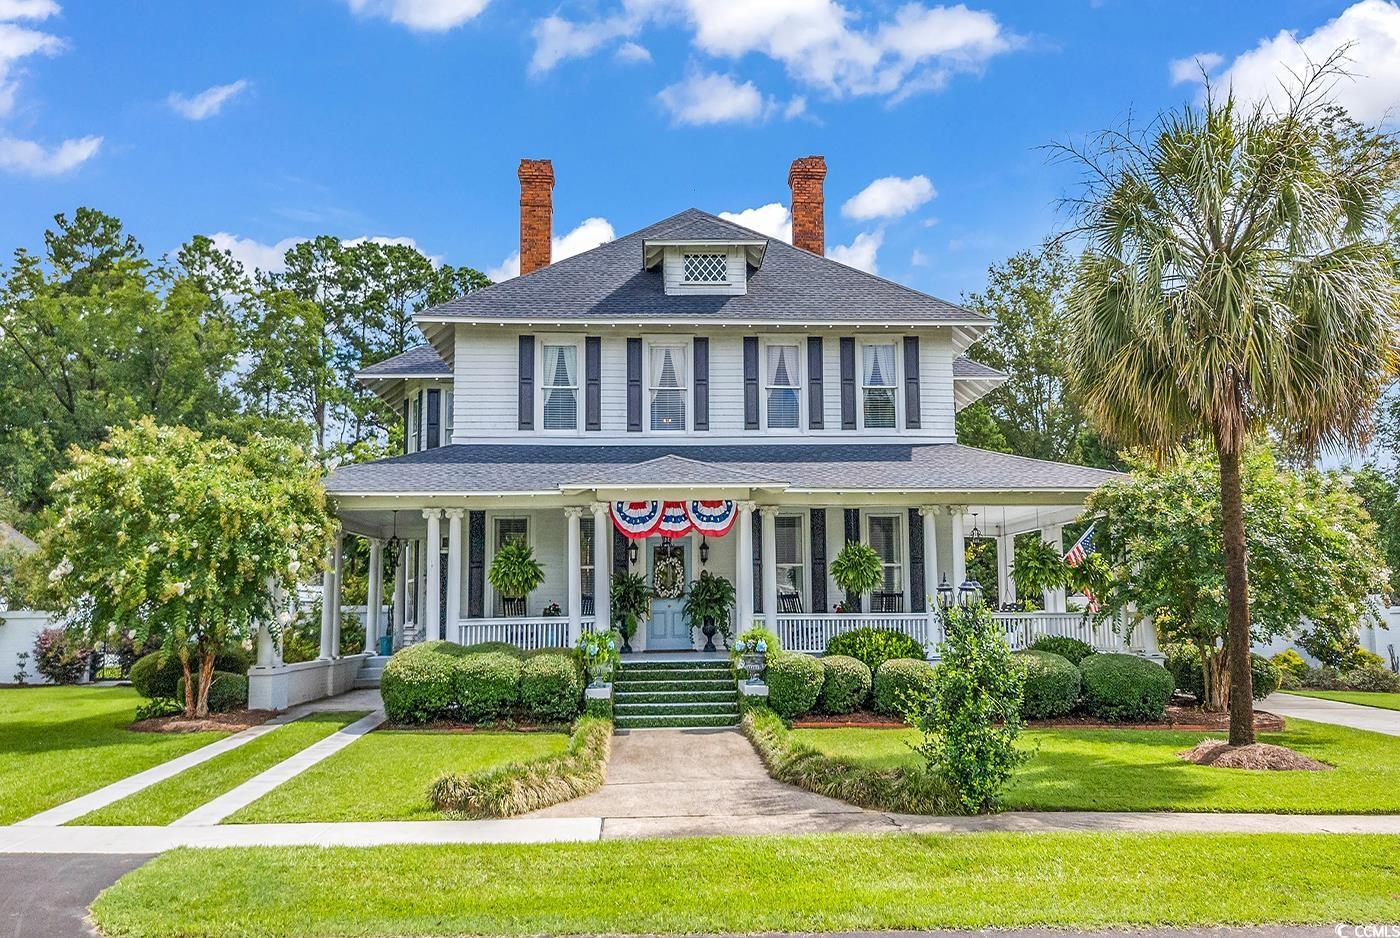 Welcome to the charming historic home in downtown Latta! This beautiful two story 4452 square foot home is ready for a new owner who wants a move in ready historical home with modern amenities! This magnificent colonial residence, constructed in 1900, is a true gem listed on the prestigious National Register of Historic Places. Immerse yourself in the allure of the past while enjoying modern comforts and conveniences. This timeless abode boasts 4 spacious bedrooms and 2.5 bathrooms, providing ample space for your family and guests. As you step inside, you will be captivated by the authenticity of the 123-year-old pine floors, lending a sense of character and warmth to every room.   The allure of history continues with not one, but 7 decorative fireplaces, each showcasing original mantles that have stood the test of time.  Preserving its historic integrity, the home proudly showcases its original windows, allowing an abundance of natural light to grace each room. The intricate moldings throughout the house serve as a testament to the skilled craftsmanship of a bygone era. Prepare to be captivated by the formal parlor, featuring a stunning coffered ceiling, a true work of art that adds elegance and sophistication to the space. It is the perfect place for relaxation and hosting gatherings. For those closer ones, a more intimate family sitting room  is positioned next to a gorgeous original Tiger-Oak mantle. This sitting area links over to the custom kitchen through open the butler’s pantry and is a place for your morning coffee. The kitchen boasts all of the amenities including a walk-in pantry and is ready for entertaining. For those nice evenings the property has front and back covered porches for visiting, reading or simply watching the birds.   From the inviting back, porch step down into a luscious haven of a meticulously managed enclosed garden as you wander to your next entertainment location by the 40,000 gallon salt water pool. Here at the picturesque coastal cabana, one can entertain family and friends for a cook out or watch a football game while the kids swim or play. This open outdoor living room is a gem featuring a gas fireplace, mini fridge and microwave perfect for movie nights!  Step into the kitchen where you will be greeted by exquisite Carrara marble countertops that elevate the aesthetic and add a touch of elegance. The countertops provide ample space for preparing and serving delicious meals, making it a chef's delight.  Enjoy the 40,000-gallon salt-water pool with friends and family. This home also features a carport, detached garage, privacy fence and historic house/barn. The small barn also has plumbing and would be an easy conversion to a mother-in-law suite if needed.   The property also boasts an electric gate with brick fencing for privacy.  Roof is two years old and all bathrooms feature new plumbing and electrical. For those with children, this house is blocks away from Latta Middle and High School making it an easy walk or commute to a premier learning experience.  Go Vikings!  With its exceptional preservation and unique features, this historic home invites you to become part of its illustrious story. This enchanting property boasts a stunning yard filled with a rich tapestry of flora, creating a picturesque and captivating outdoor space. Step into a world of natural beauty and tranquility with an impressive array of plant life that will leave you in awe. As you enter the yard, you will be greeted by the vibrant and delicate blooms of crepe myrtles, tea olives, magnolias, hydrangeas, camellias, azaleas, roses, confederate jasmine, chaste trees and olive trees.  Do not miss the opportunity to own a piece of history while enjoying the comforts of modern living. Schedule a visit today and step into the past with this extraordinary colonial home in downtown Latta, SC.